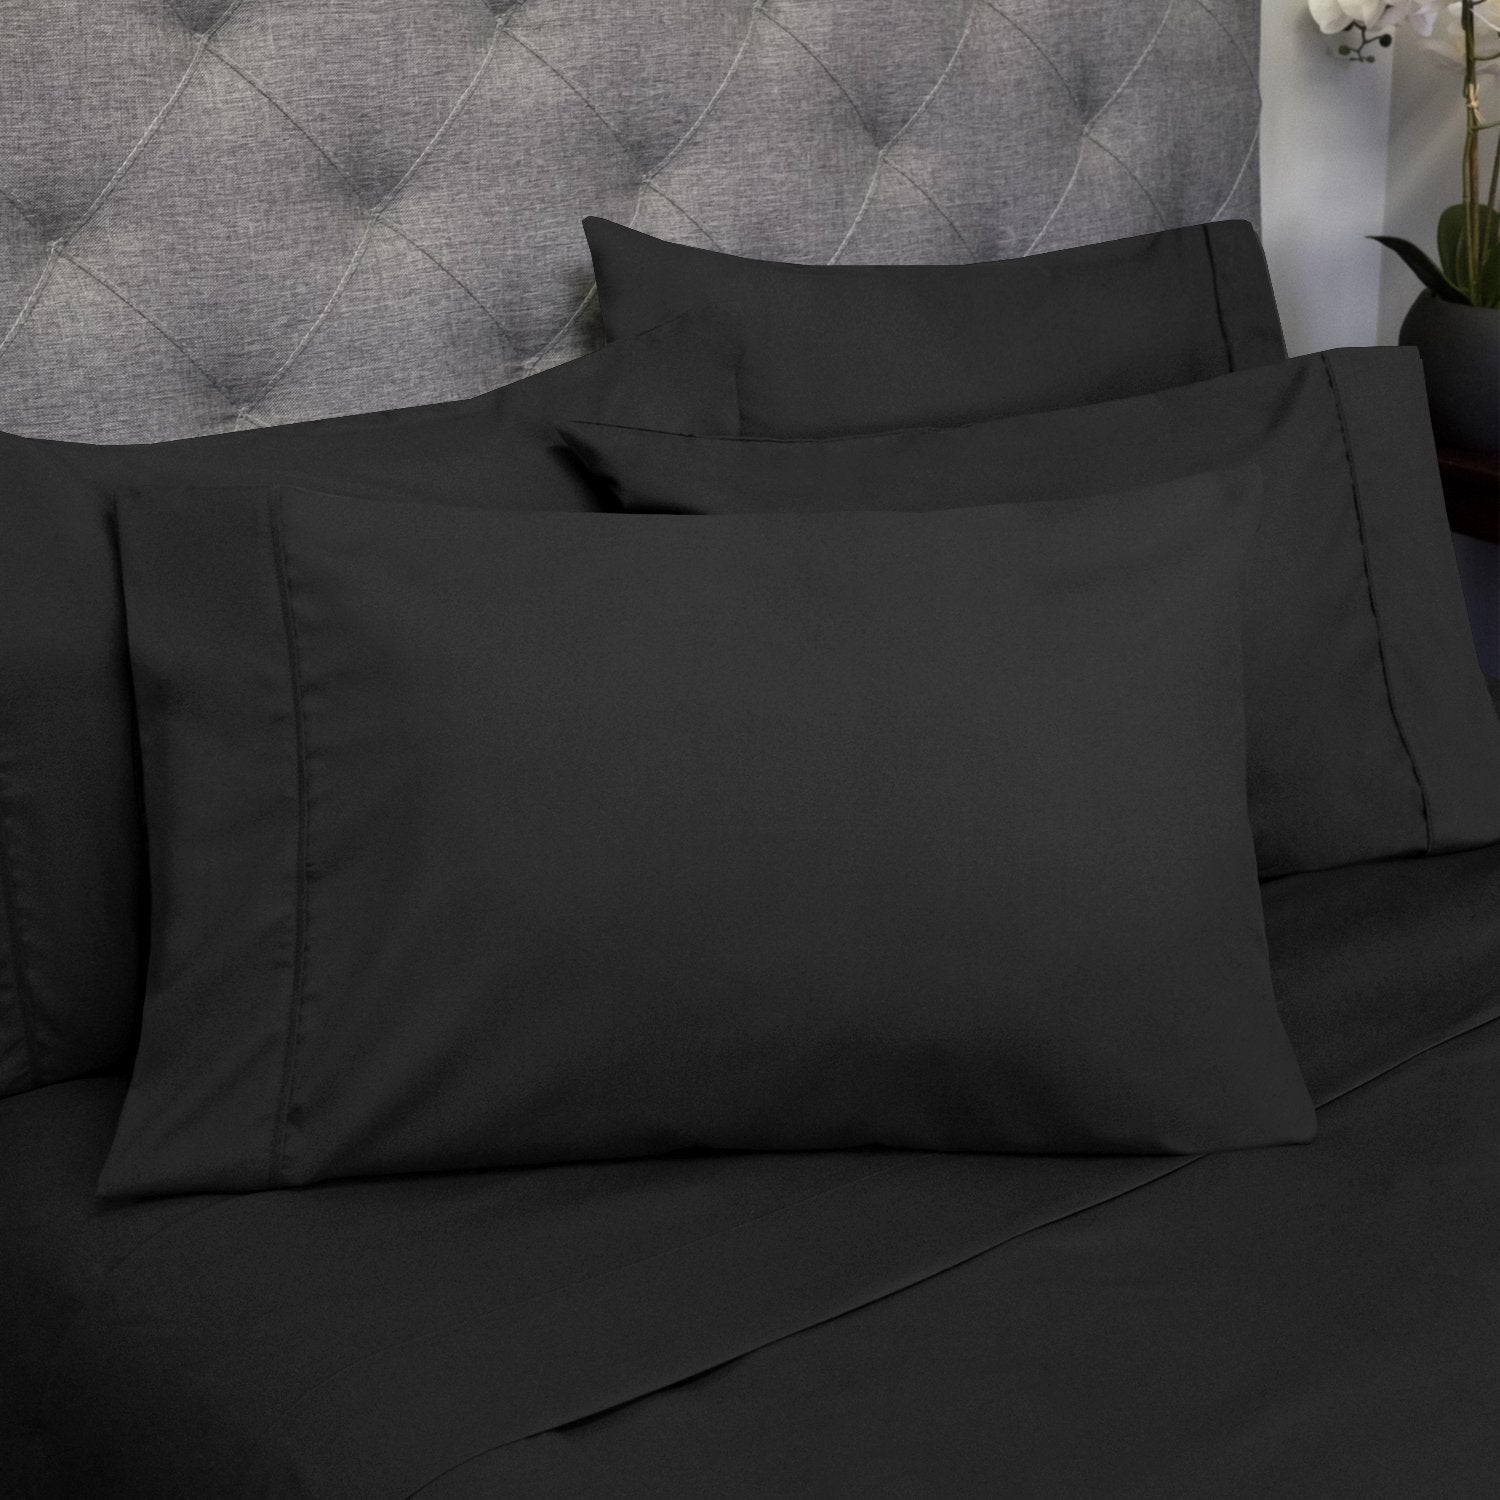 Deluxe 6-Piece Bed Sheet Set (Black) - Pillowcases